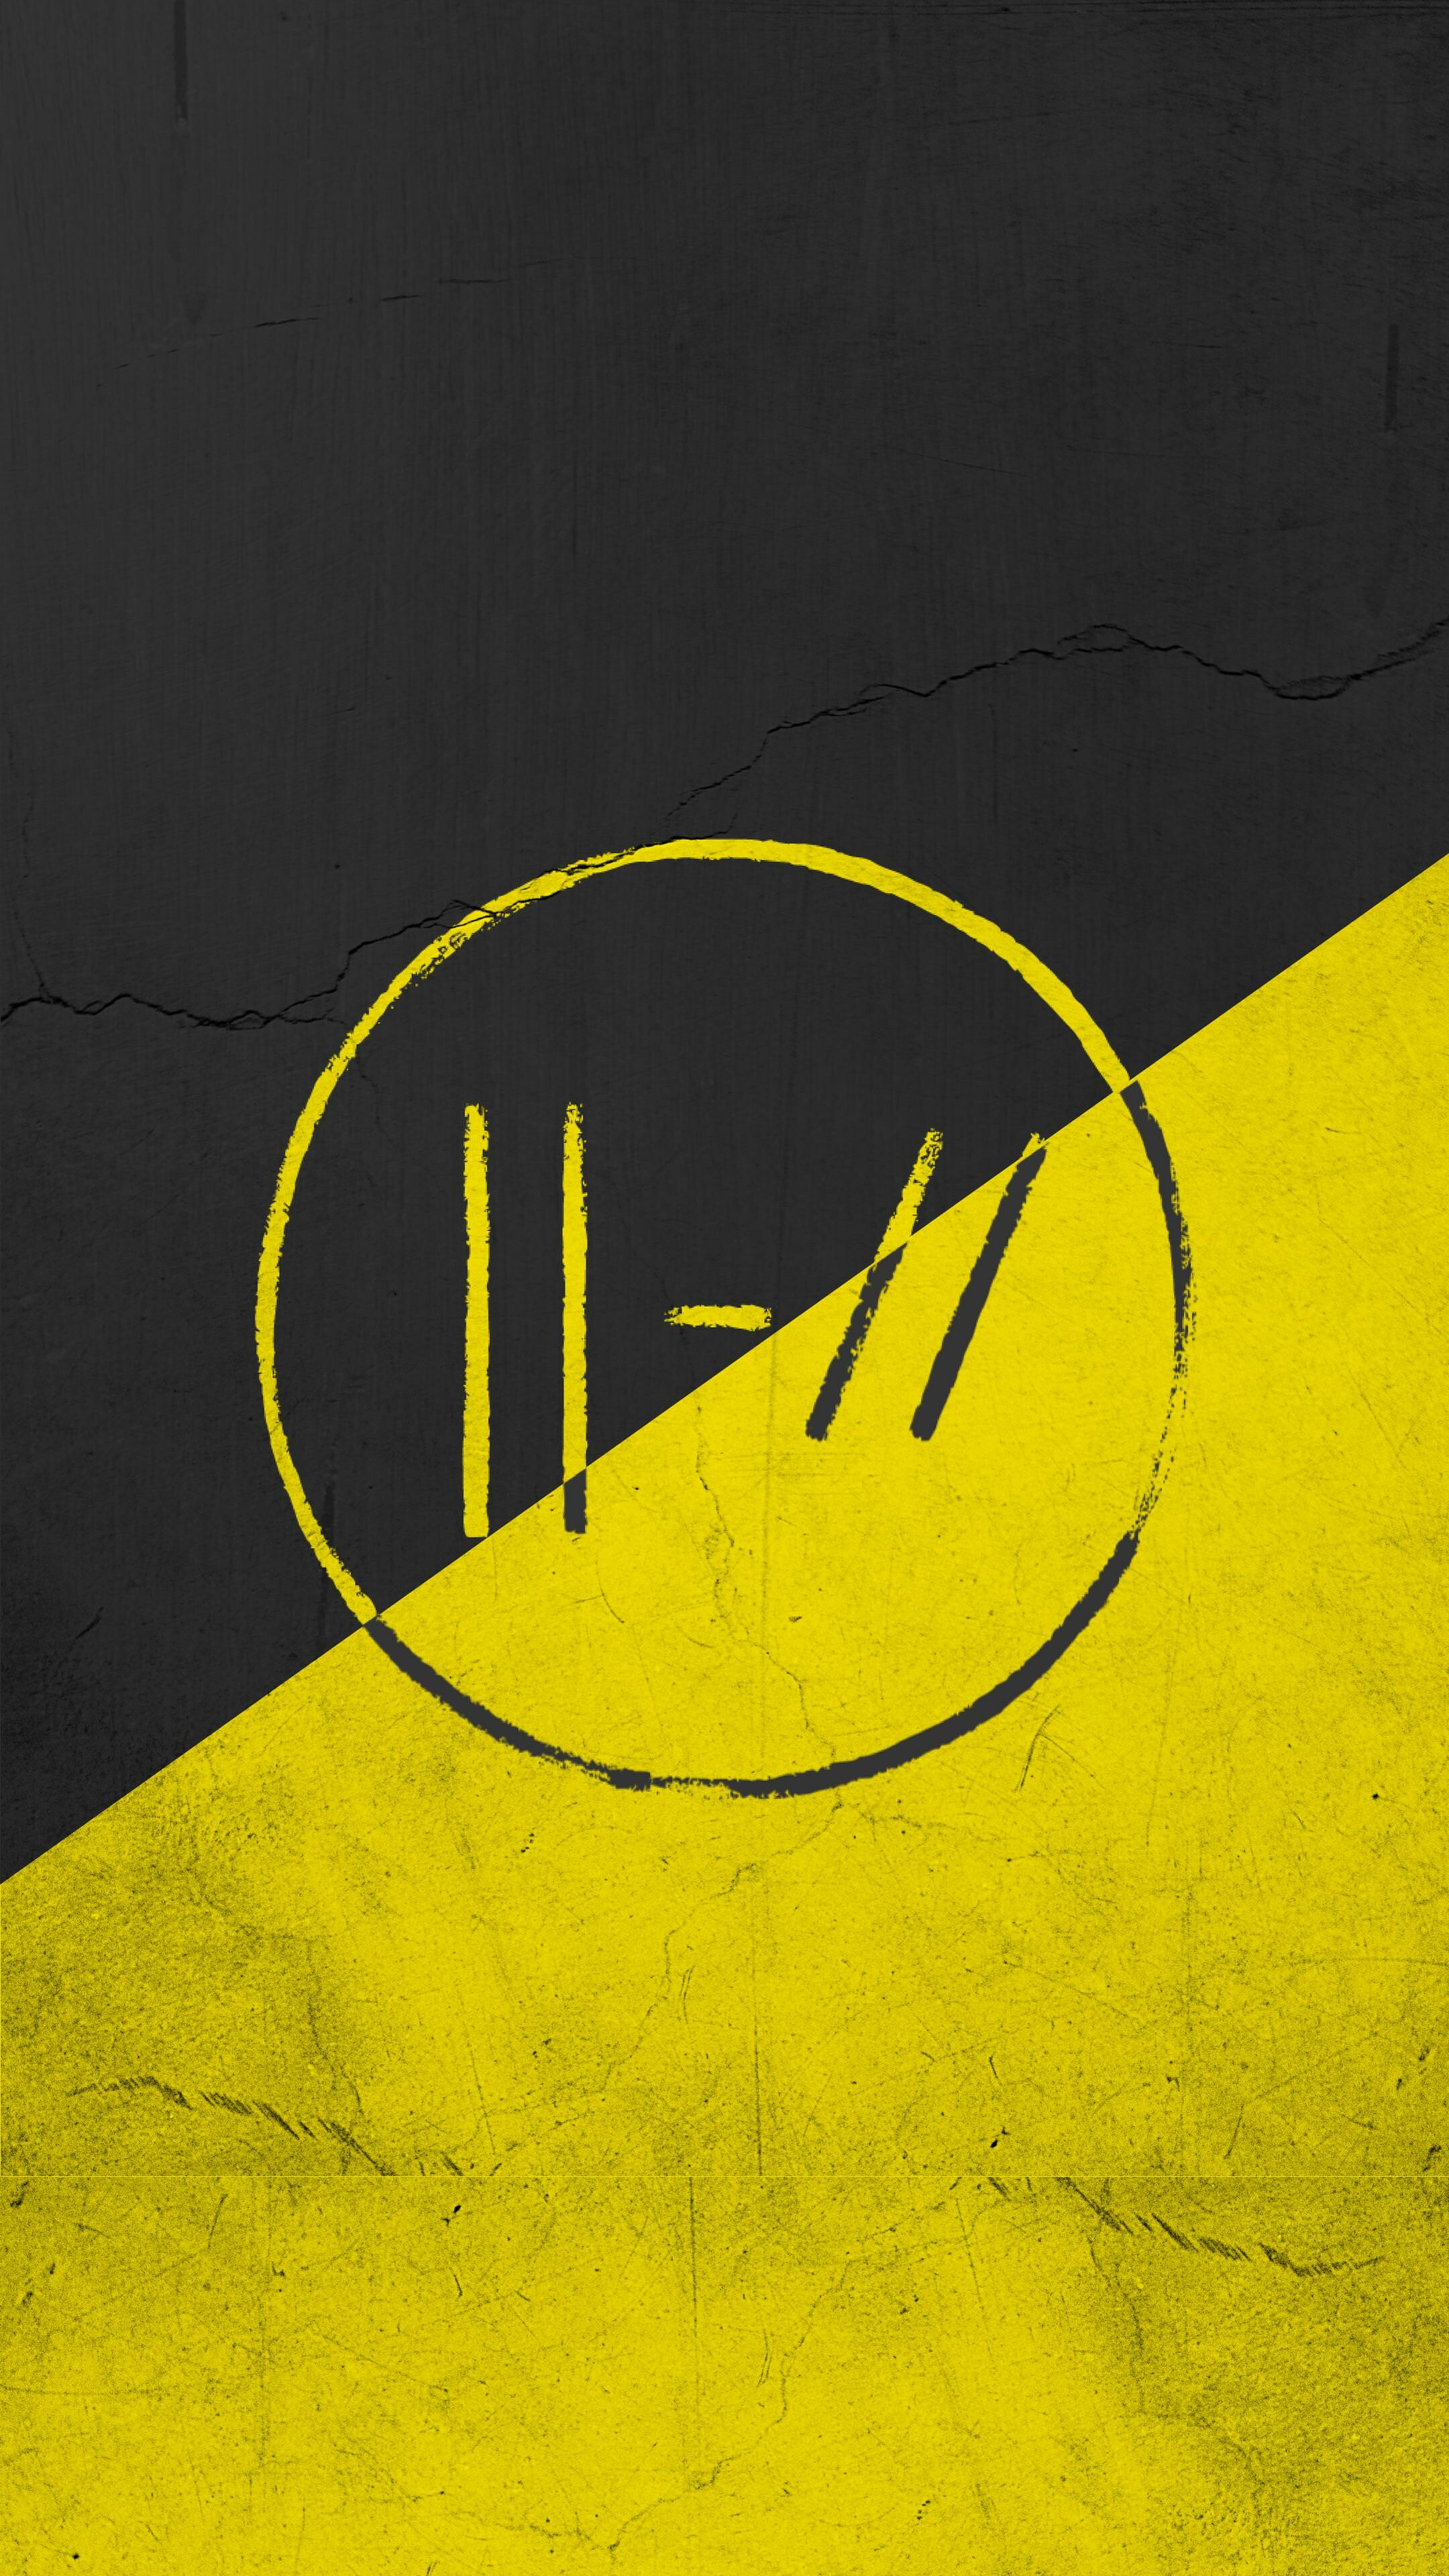 Twenty One Pilots: Initially, a band was formed in 2009 by lead vocalist Tyler Joseph along with Nick Thomas and Chris Salih. 2160x3840 4K Background.